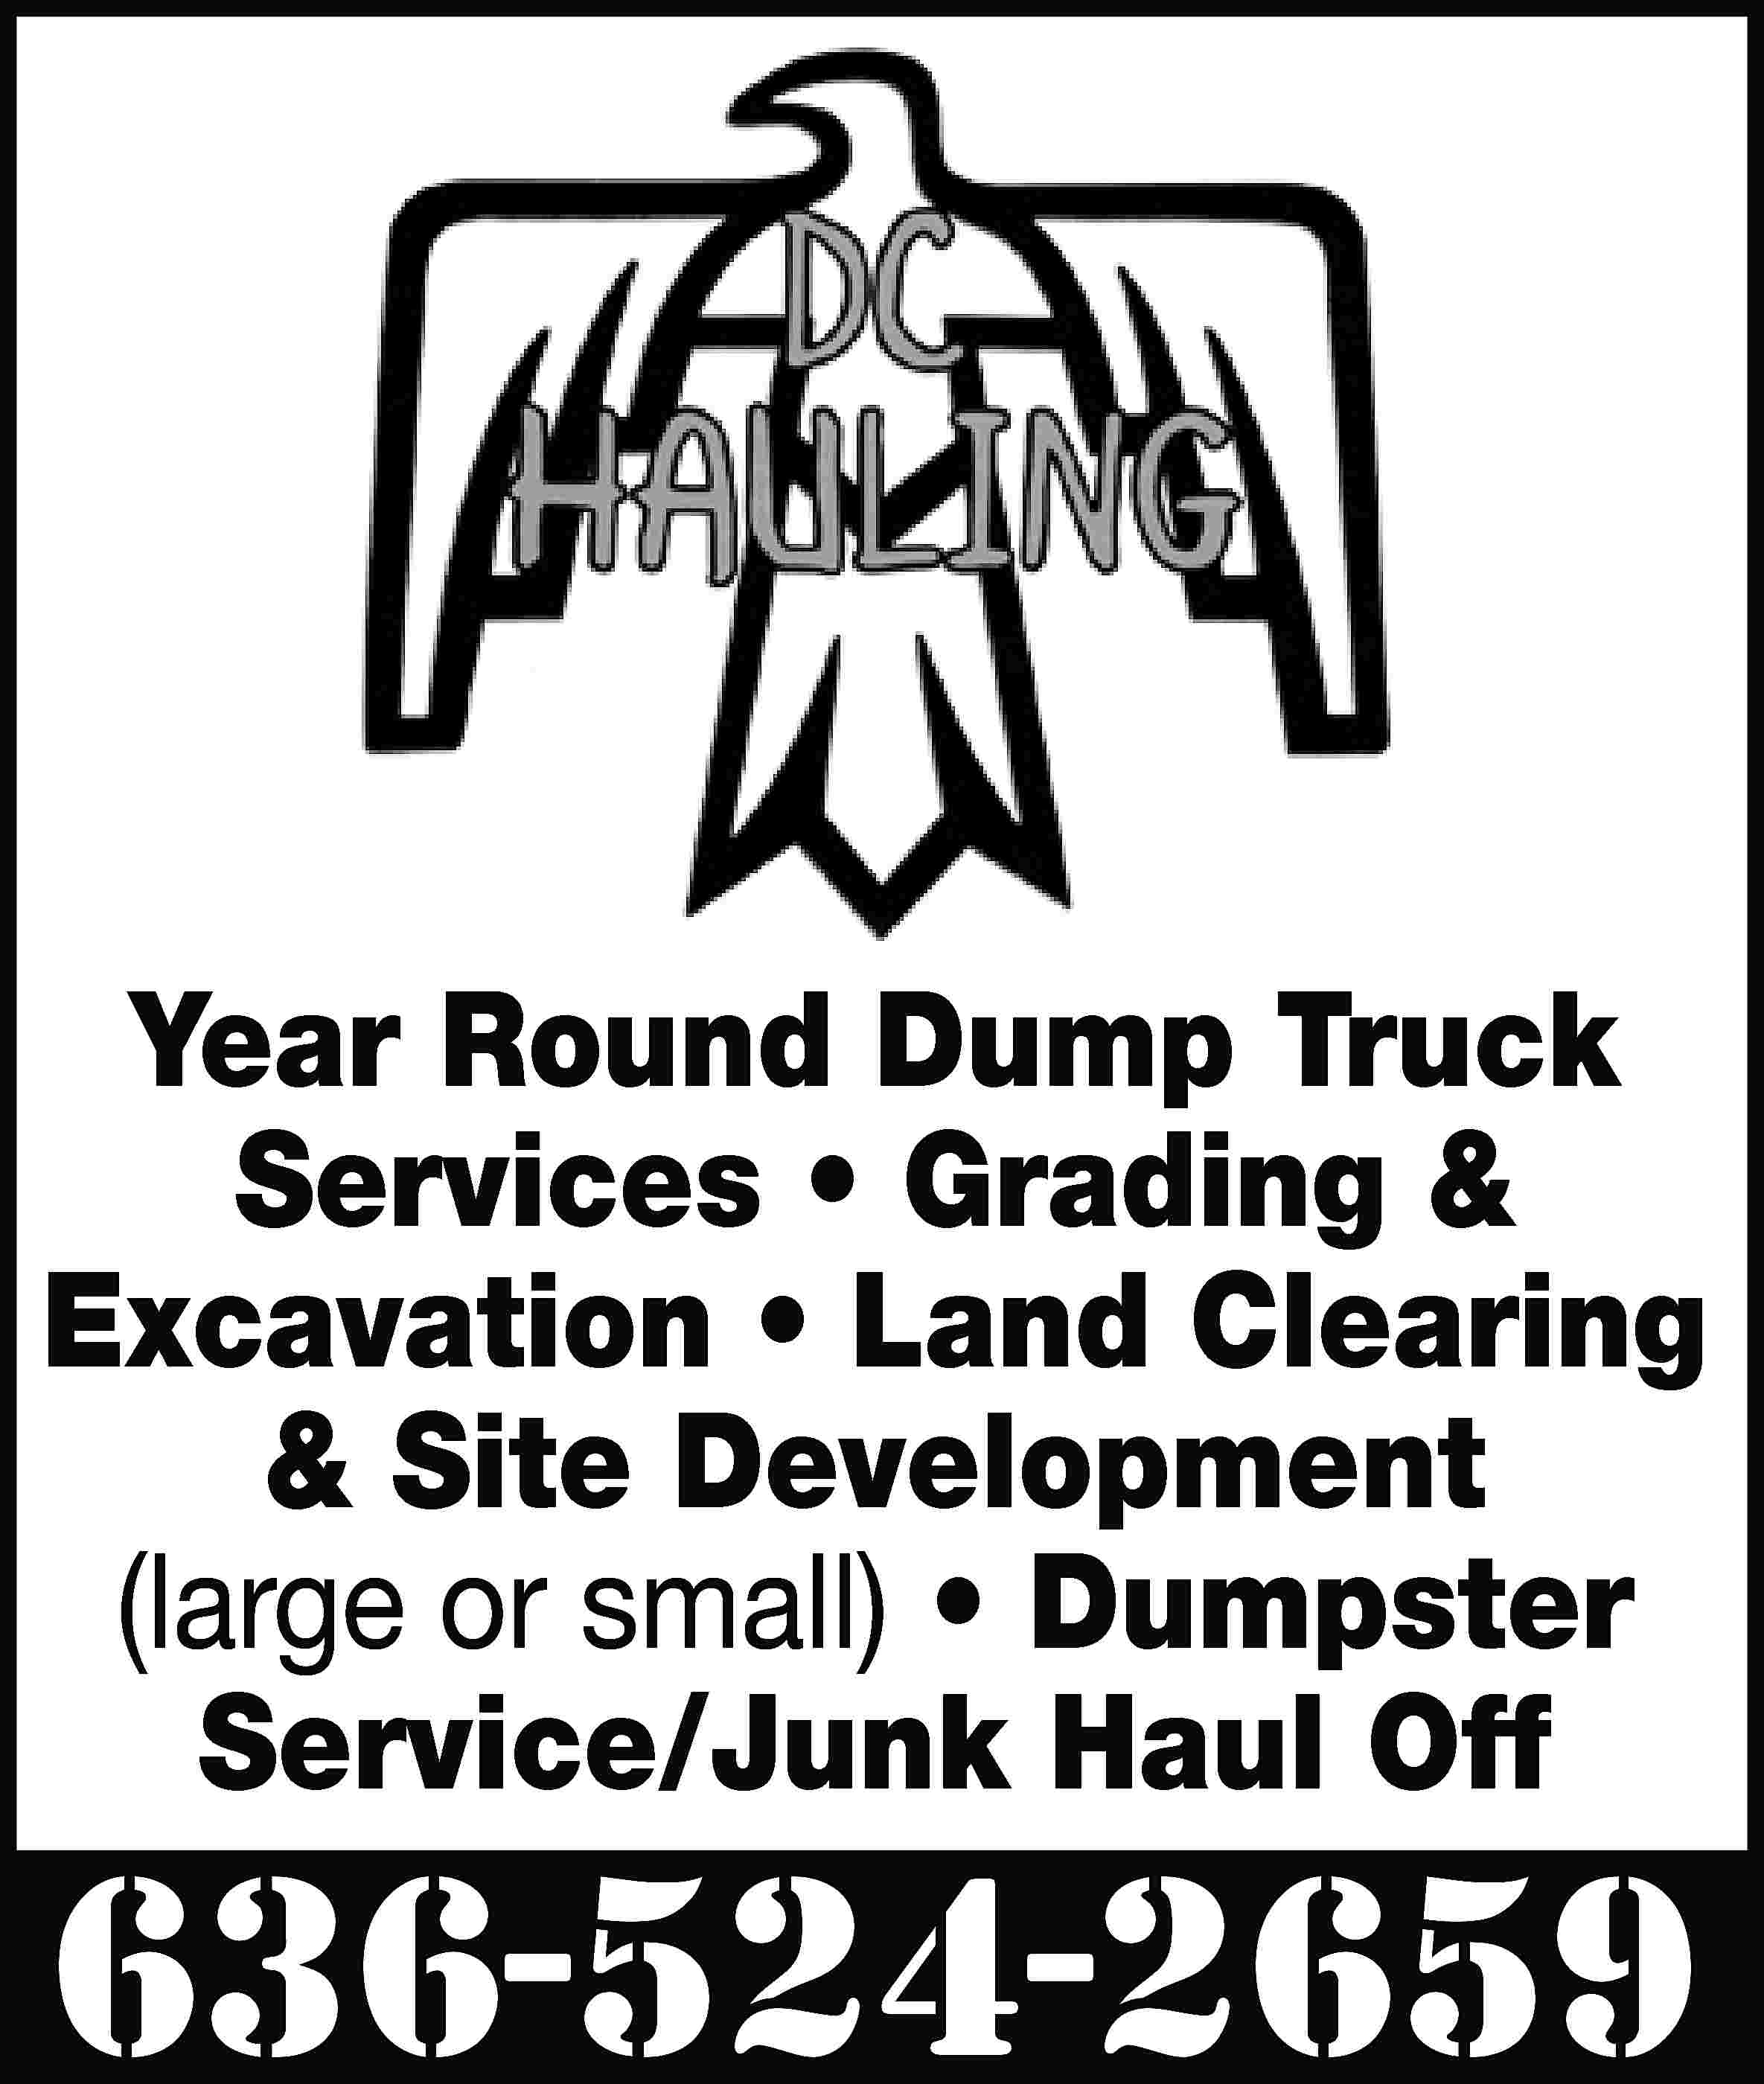 Year Round Dump Truck Services  Year Round Dump Truck Services • Grading & Excavation • Land Clearing & Site Development (large or small) • Dumpster Service/Junk Haul Off 636-524-2659